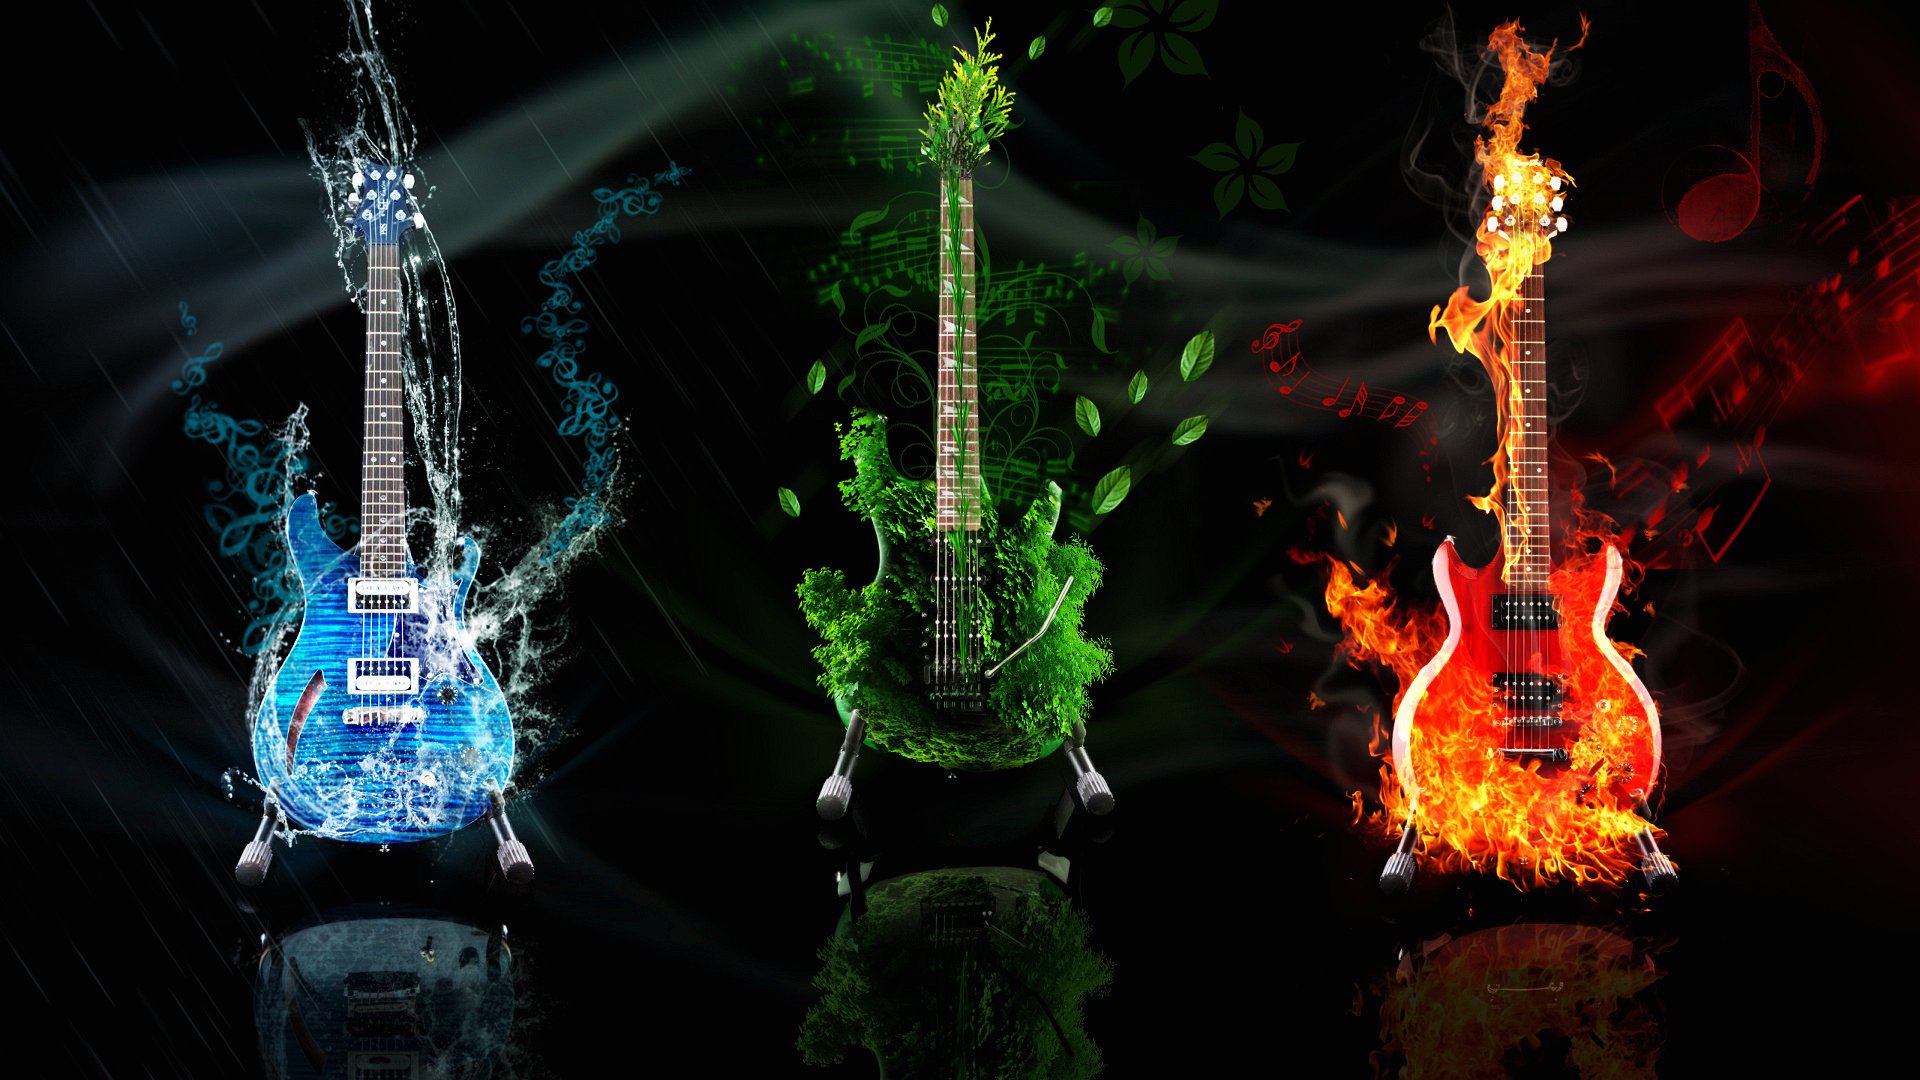 Gallery For Gt Awesome Music Abstract Wallpaper